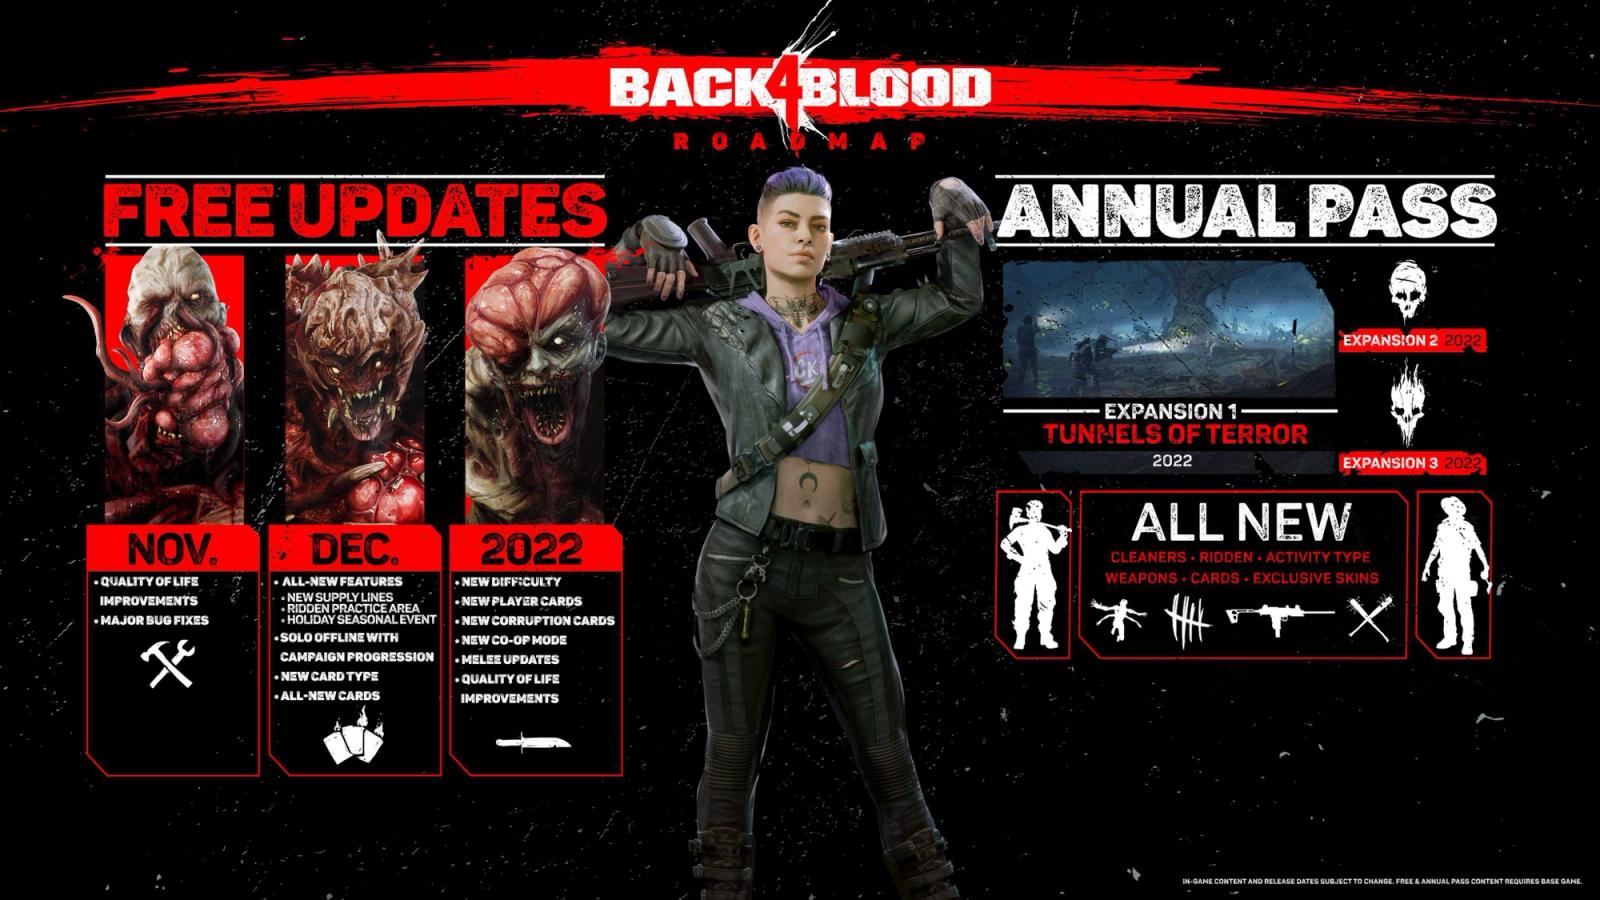 A roadmap showing the content coming to Back 4 Blood in 2021 and 2022